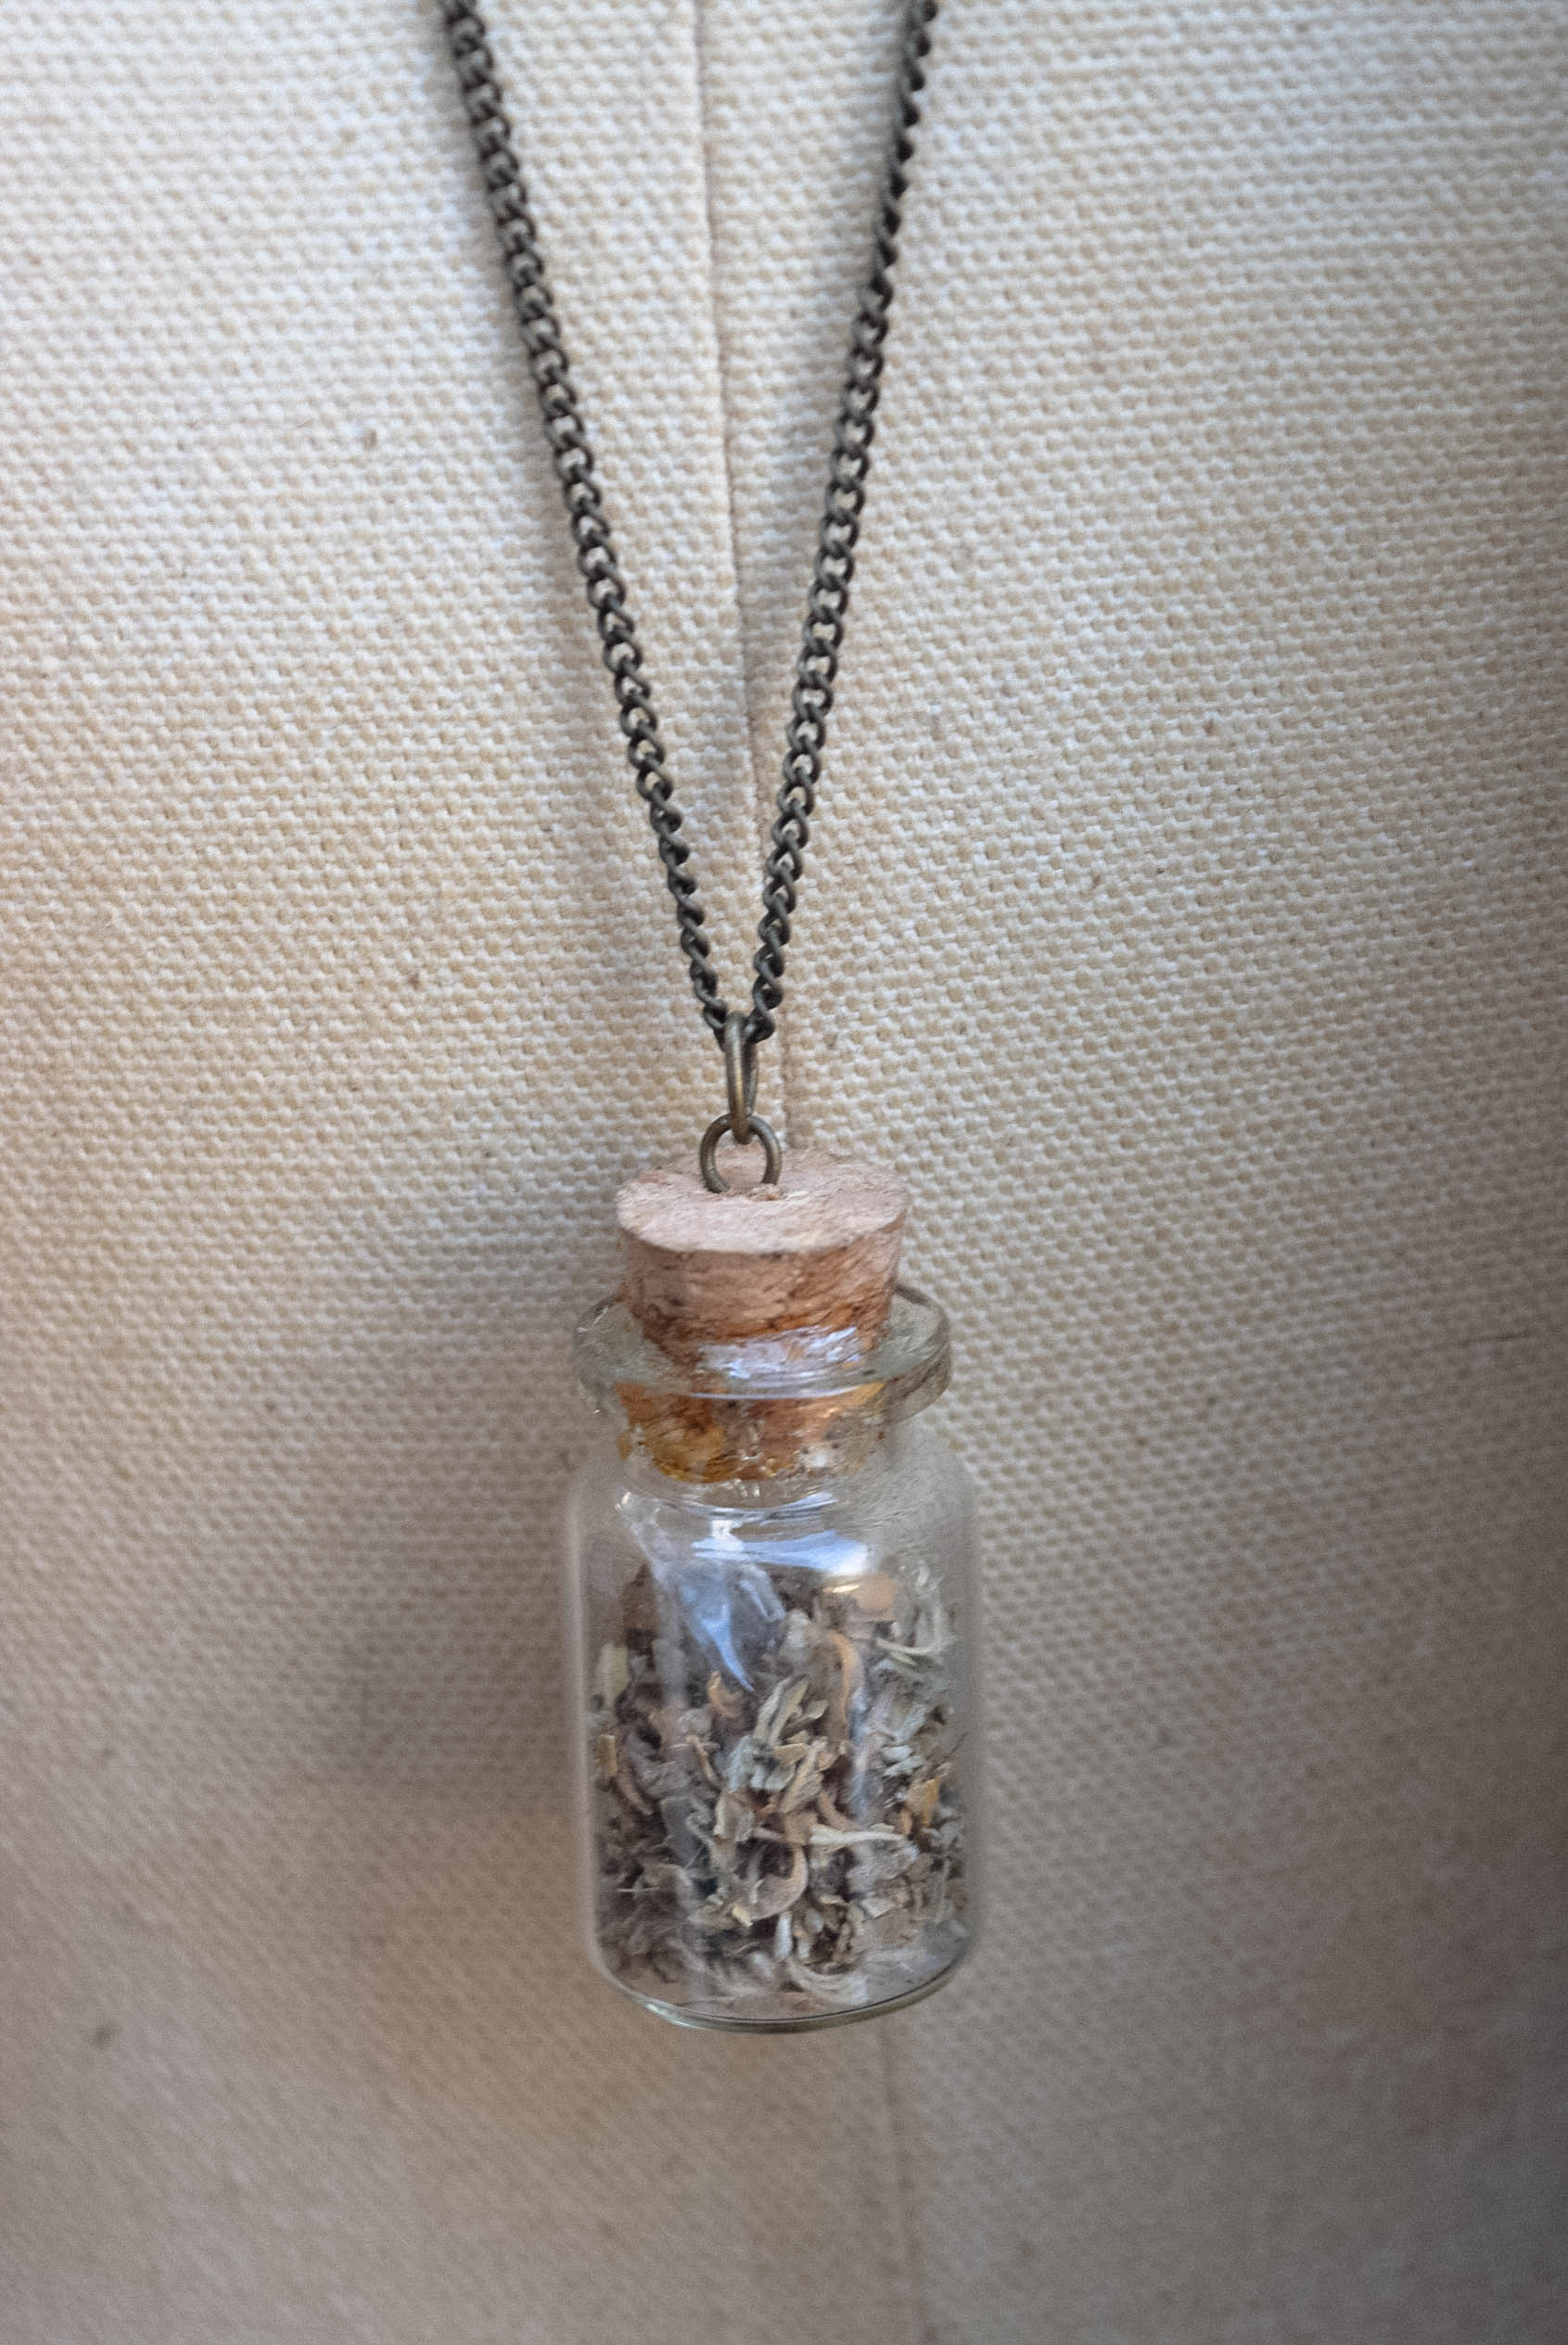 CLAIRVOYANCE - Necklace for Astral Travel and Increased Psychic Ability with Damiana and Quartz Crystal